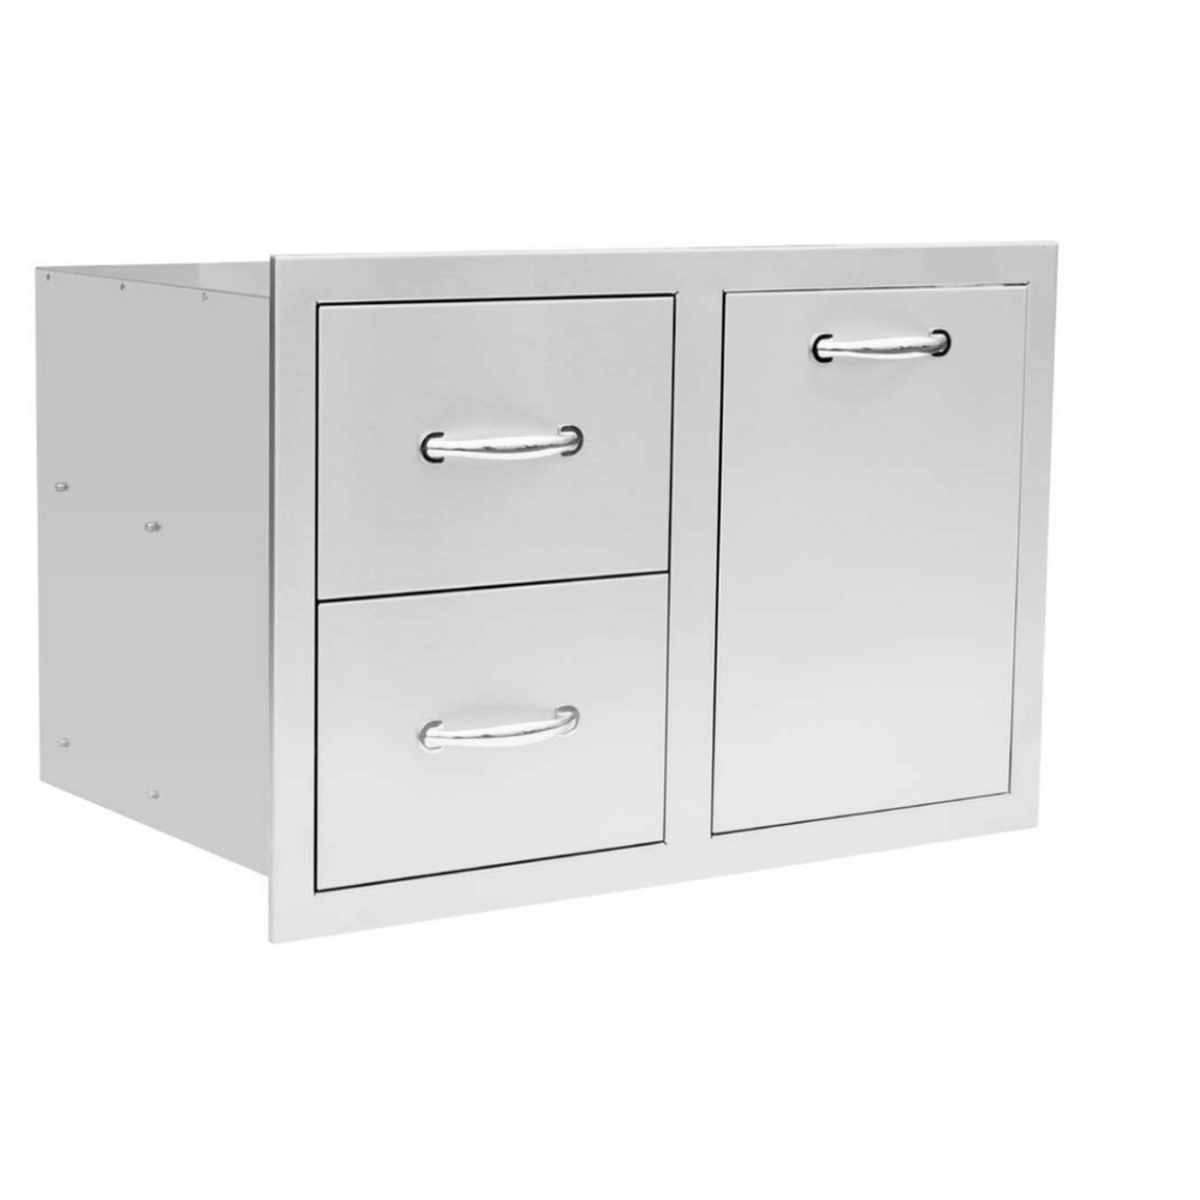 TrueFlame 33&quot; 2-Drawer and Vented LP Tank Pullout Drawer Combo